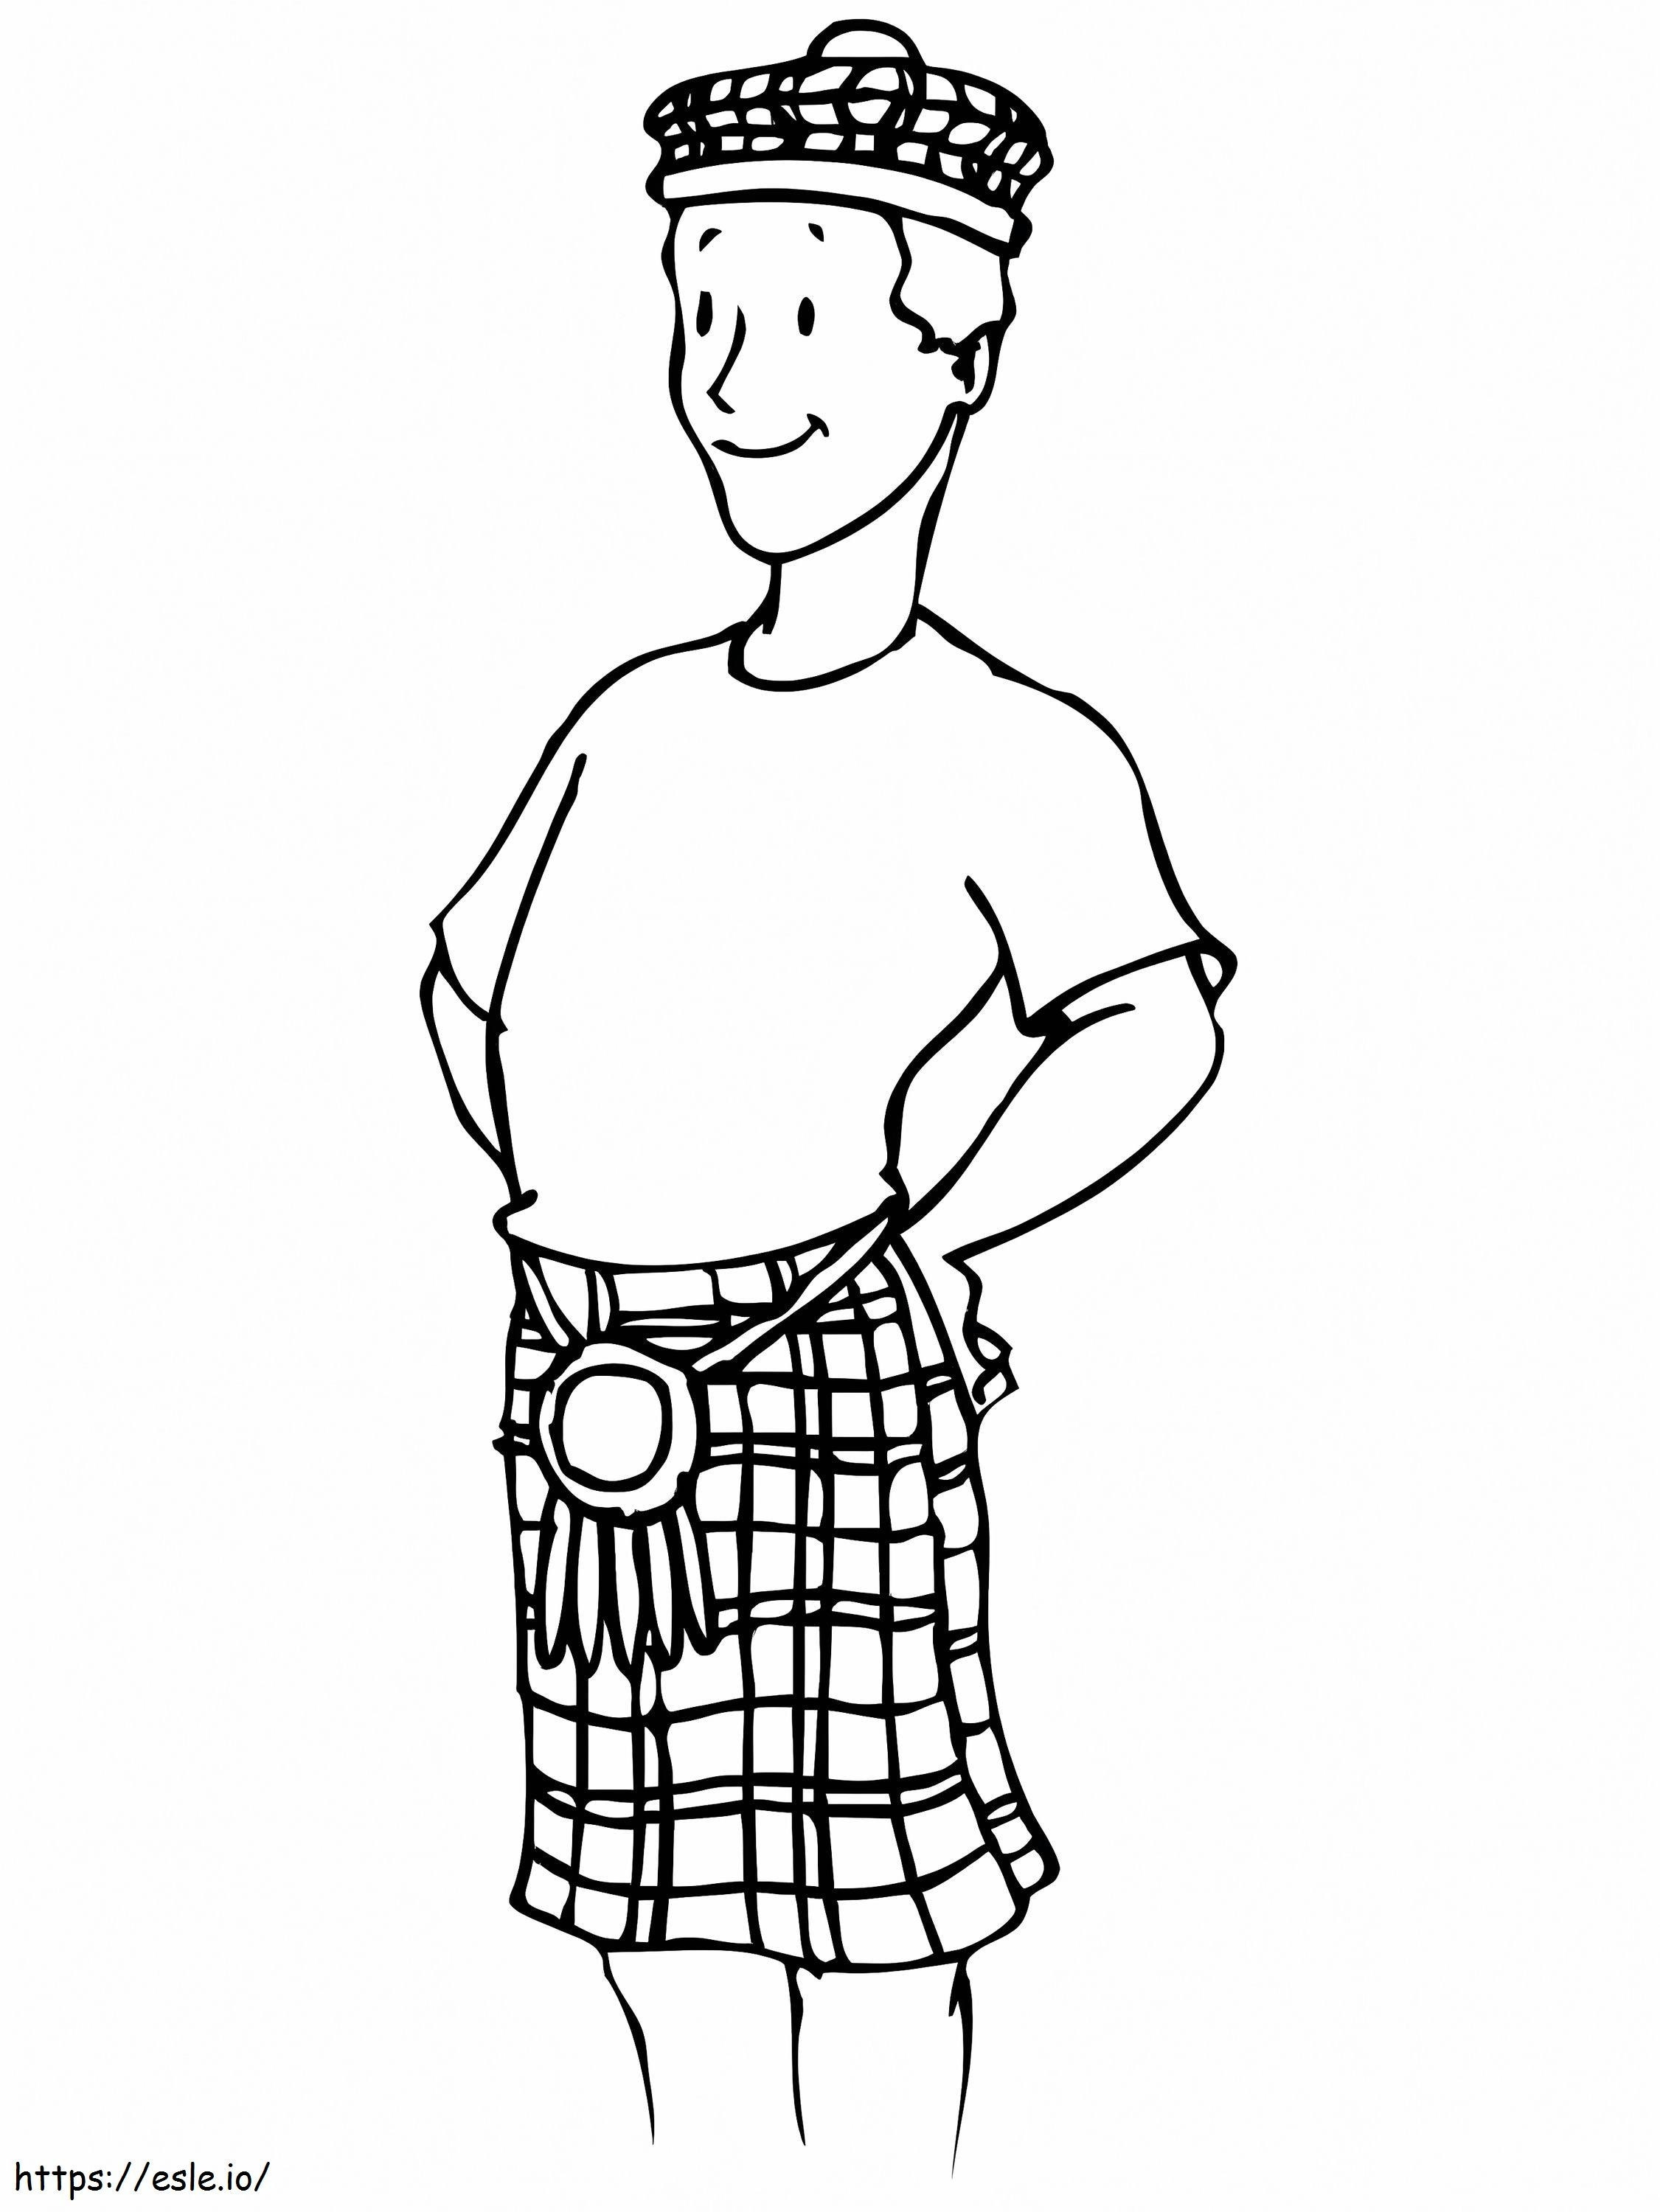 Boy In A Skirt coloring page